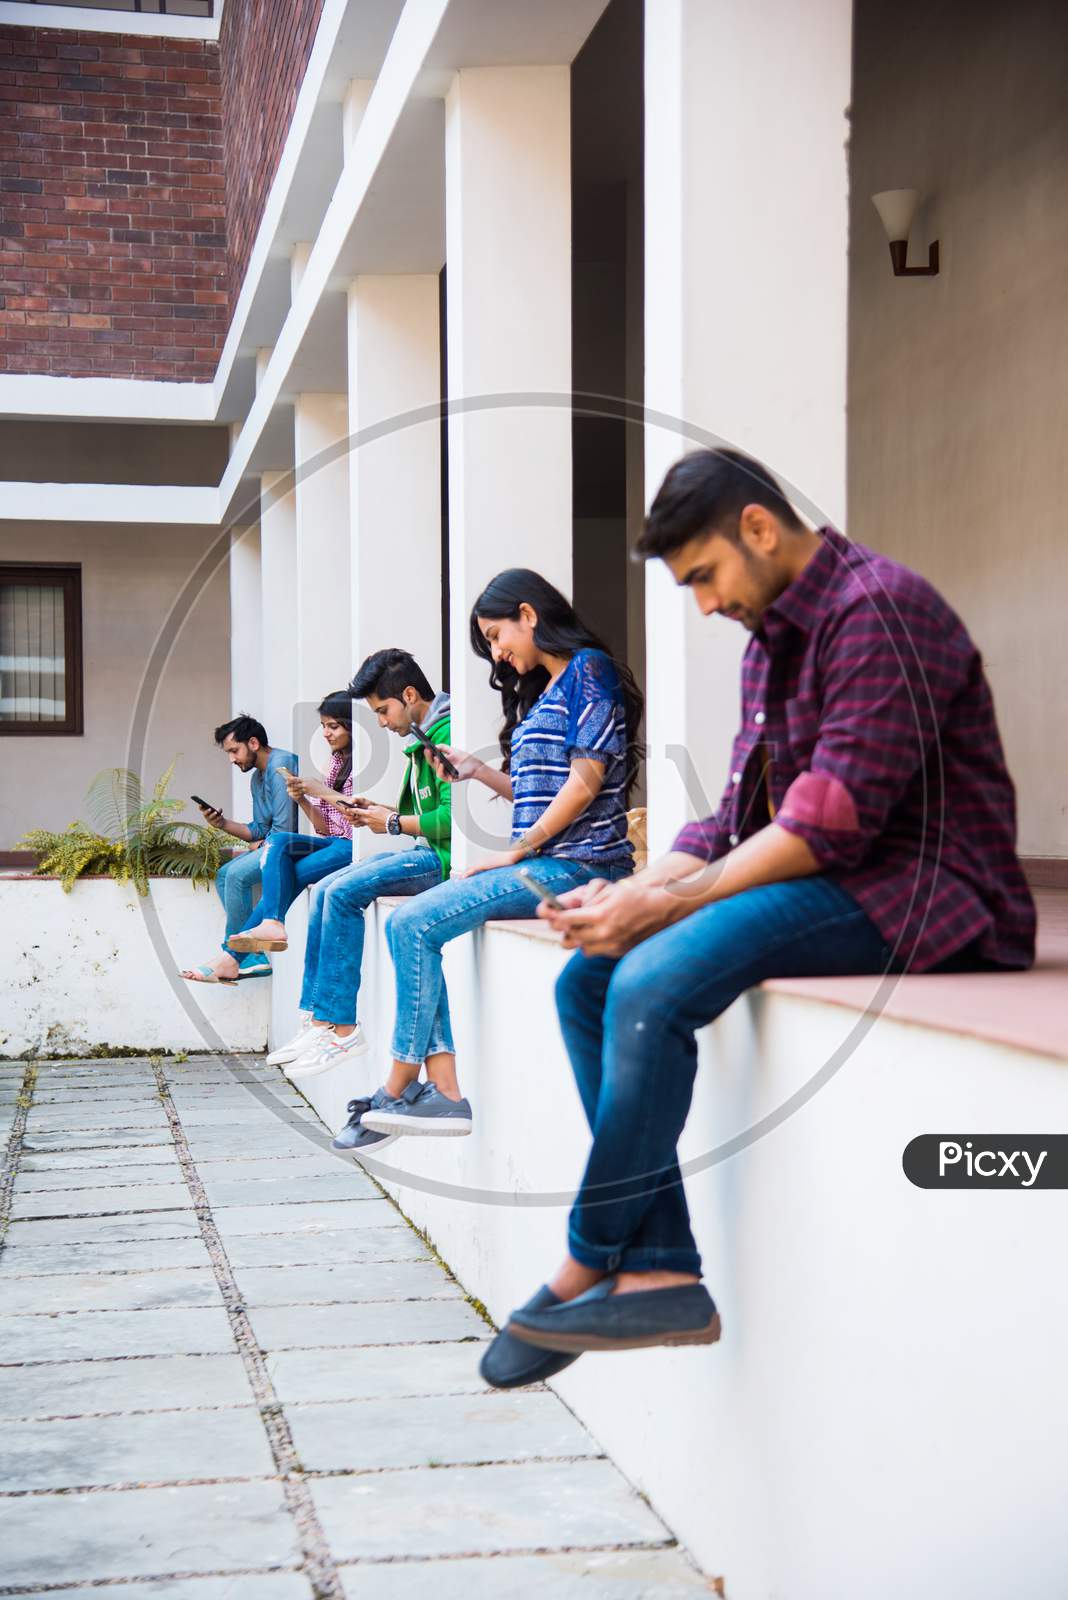 Indian Asian Group Of College Students Using Smartphones For Social Media, Texting, Watching Videos